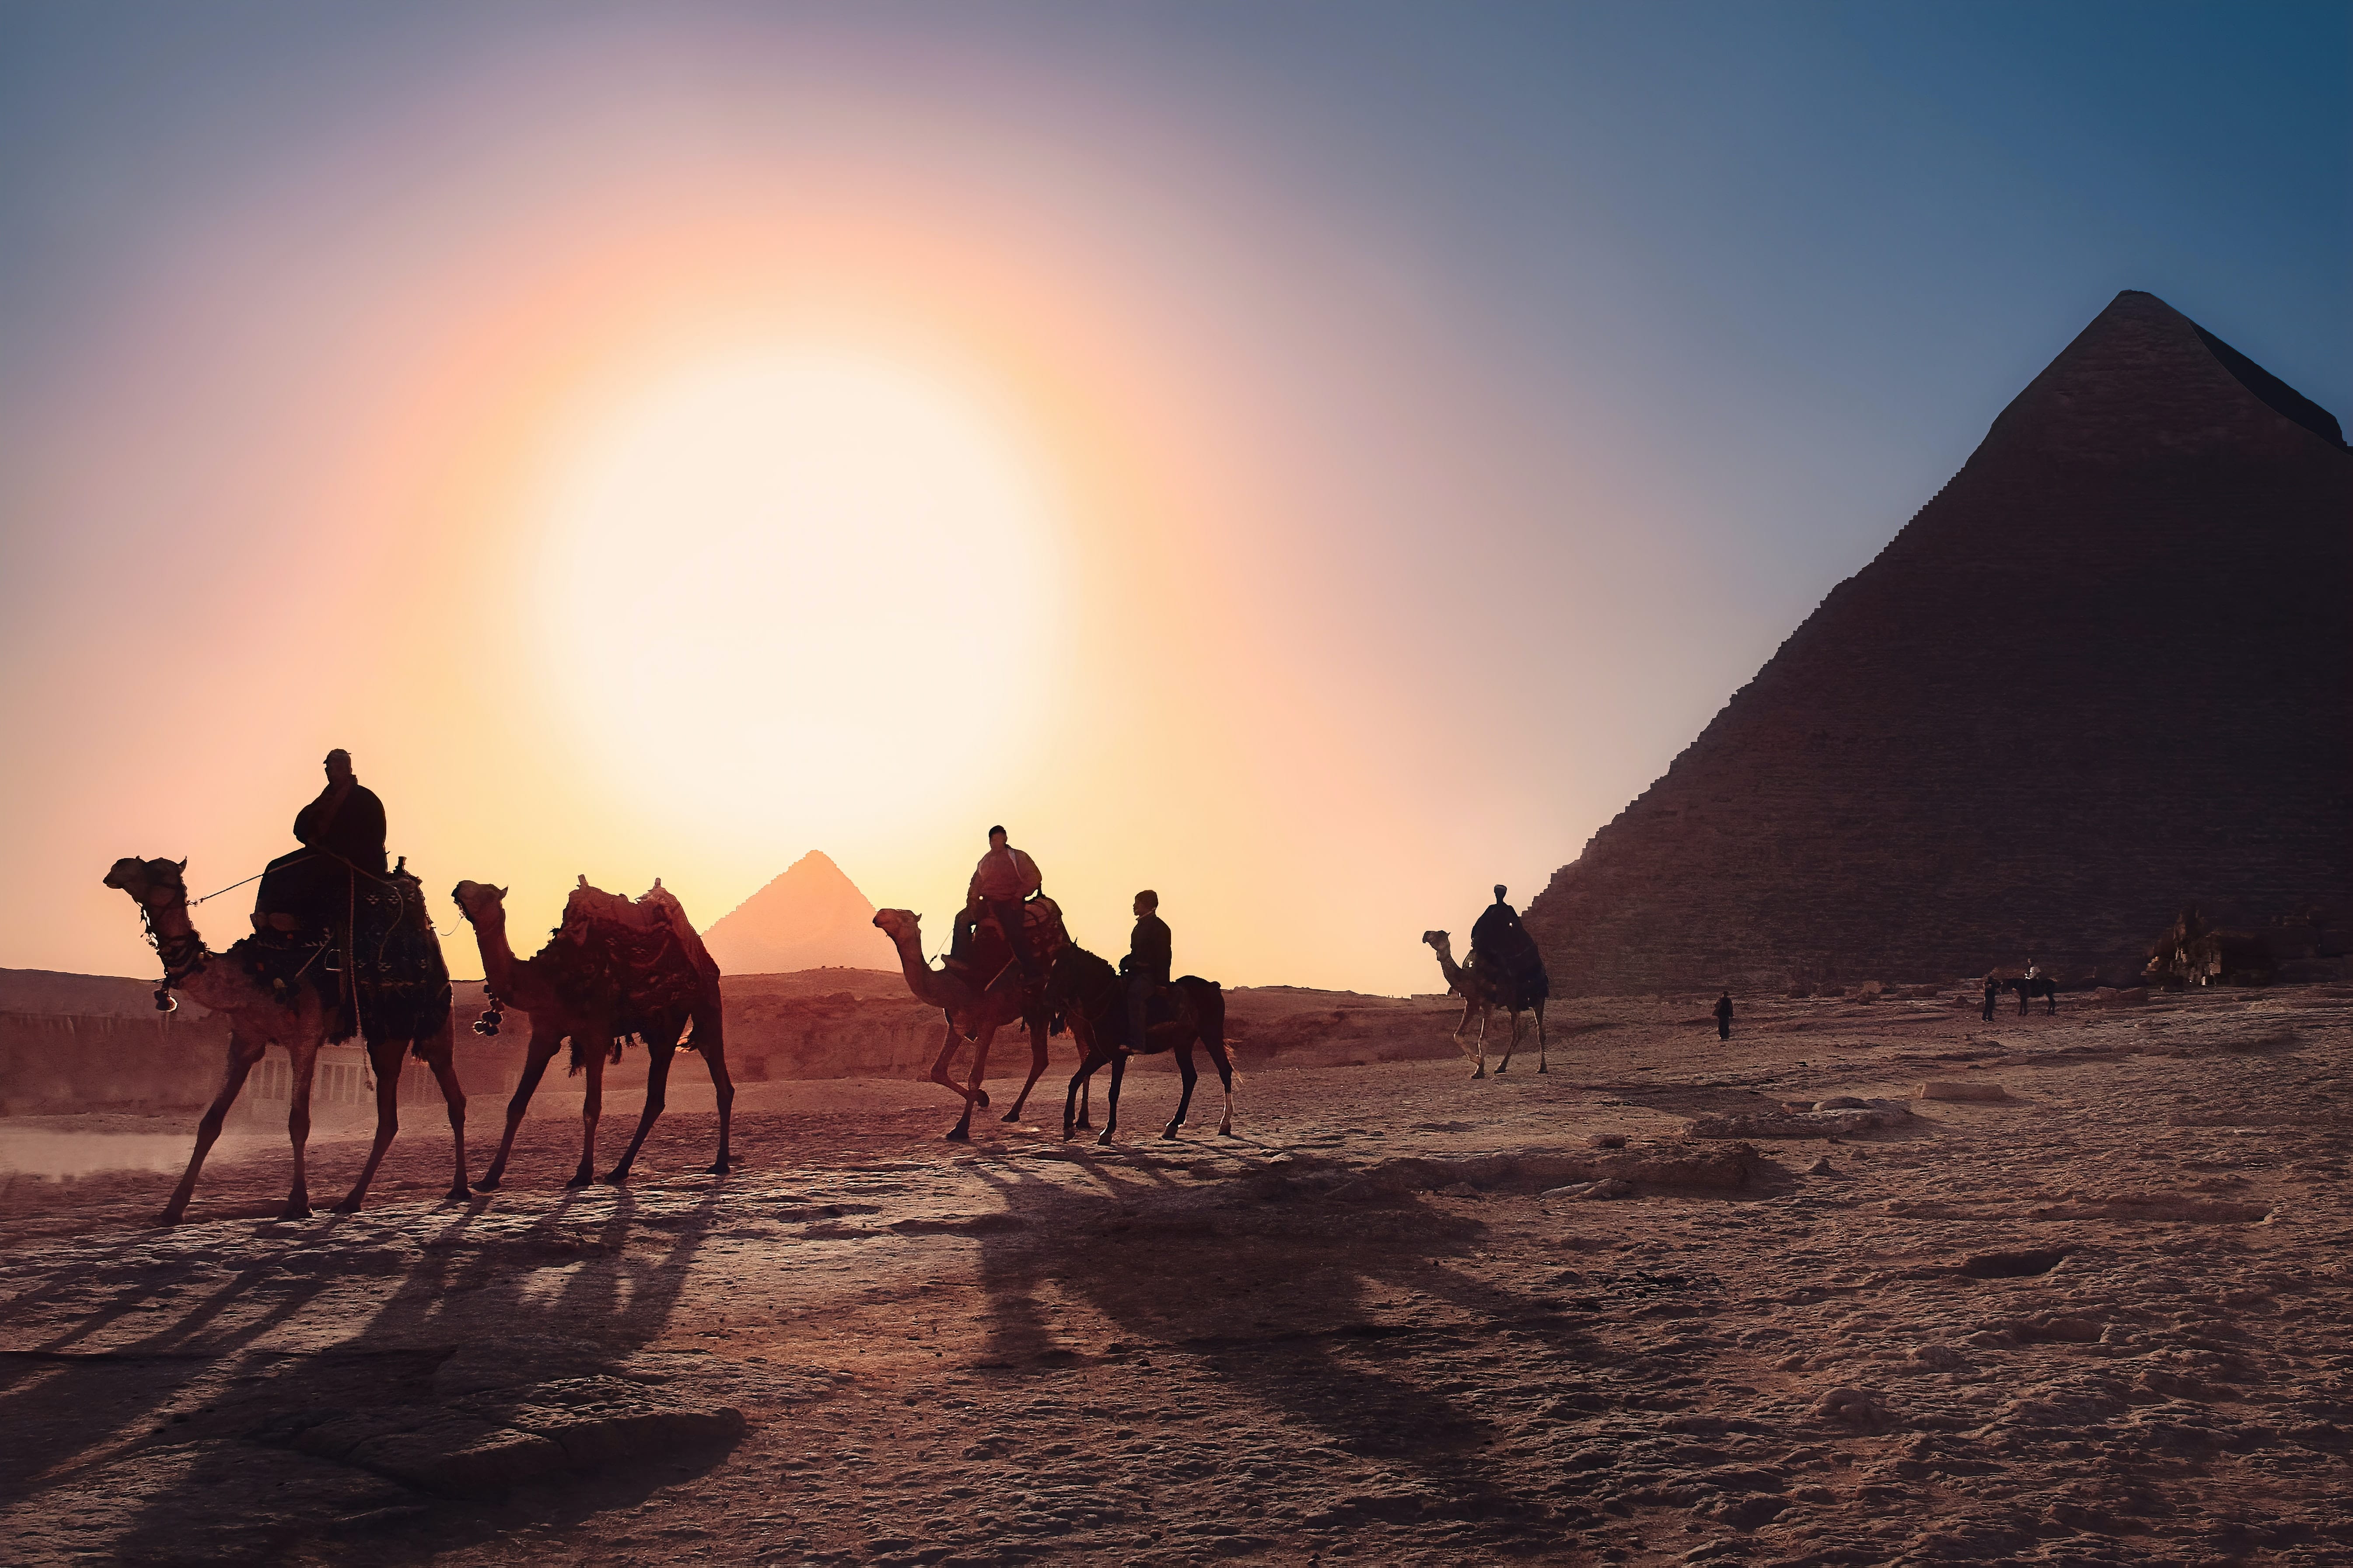 Image of camels with The Great Pyramids of Giza in the background